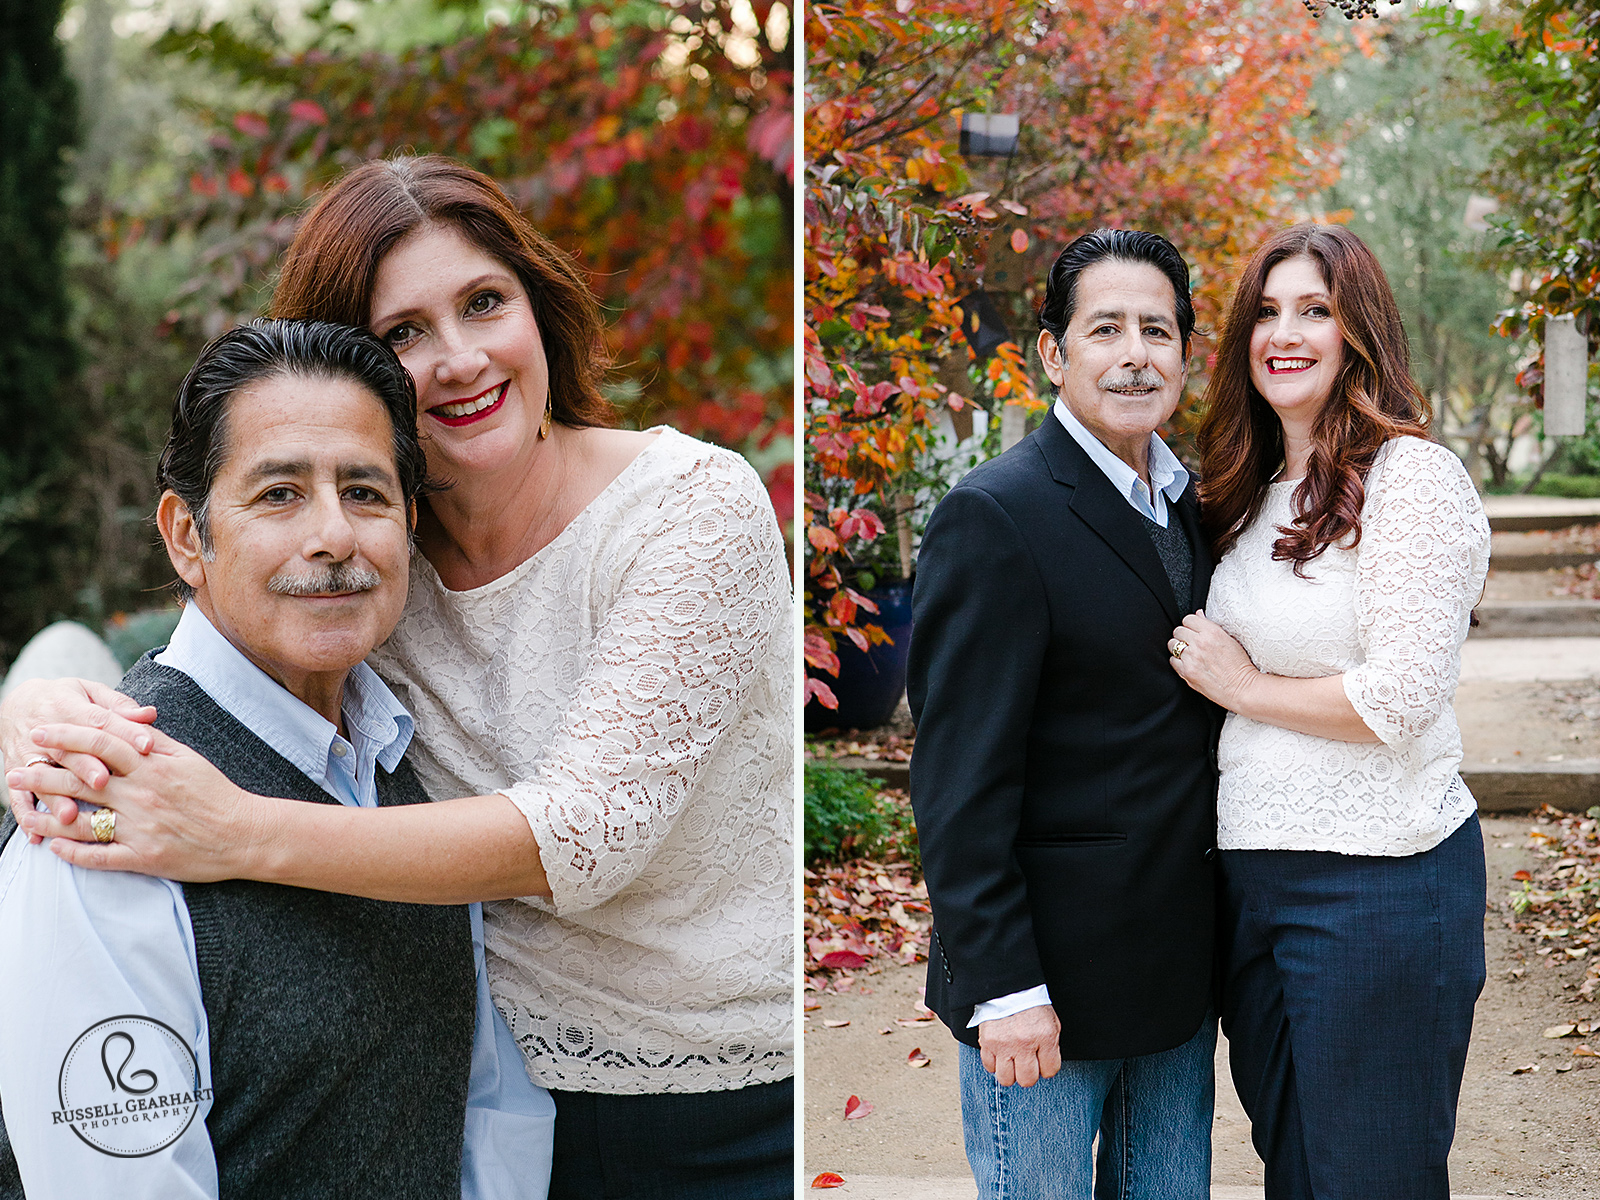 Pasadena Outdoor Family Portraits: The Medranos – Russell Gearhart Photography – www.gearhartphoto.com 